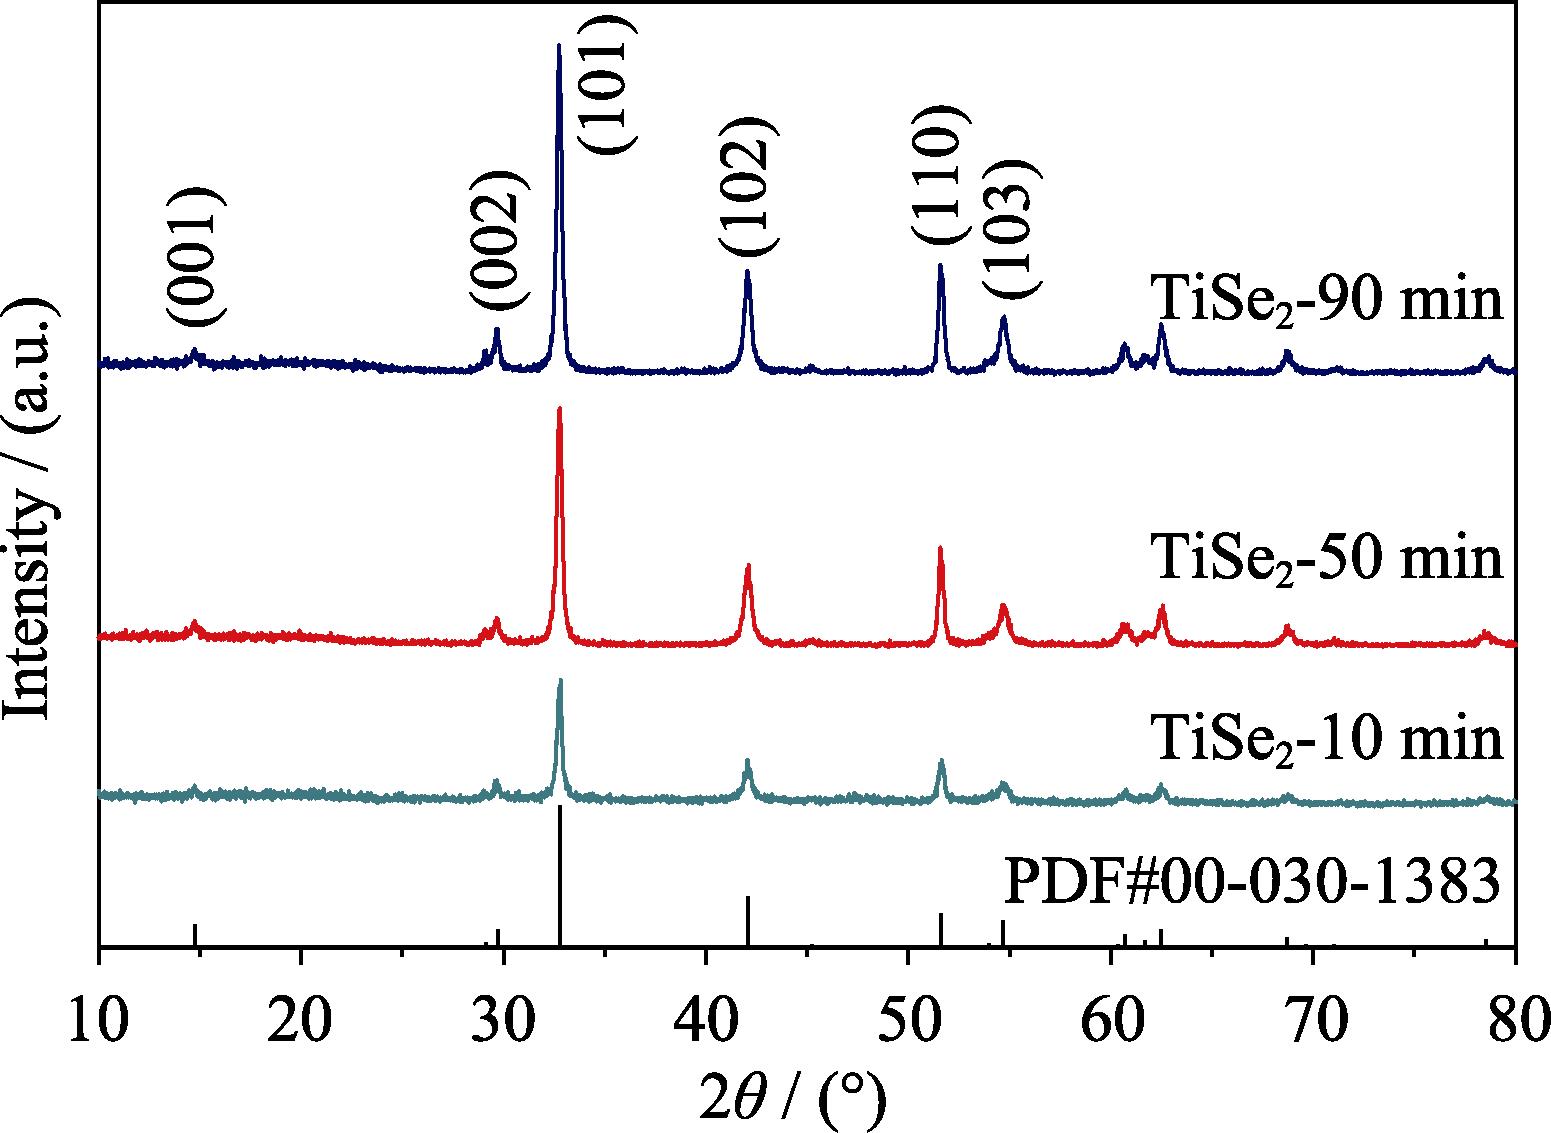 XRD patterns of TiSe2 nanosheets grown at different reaction time